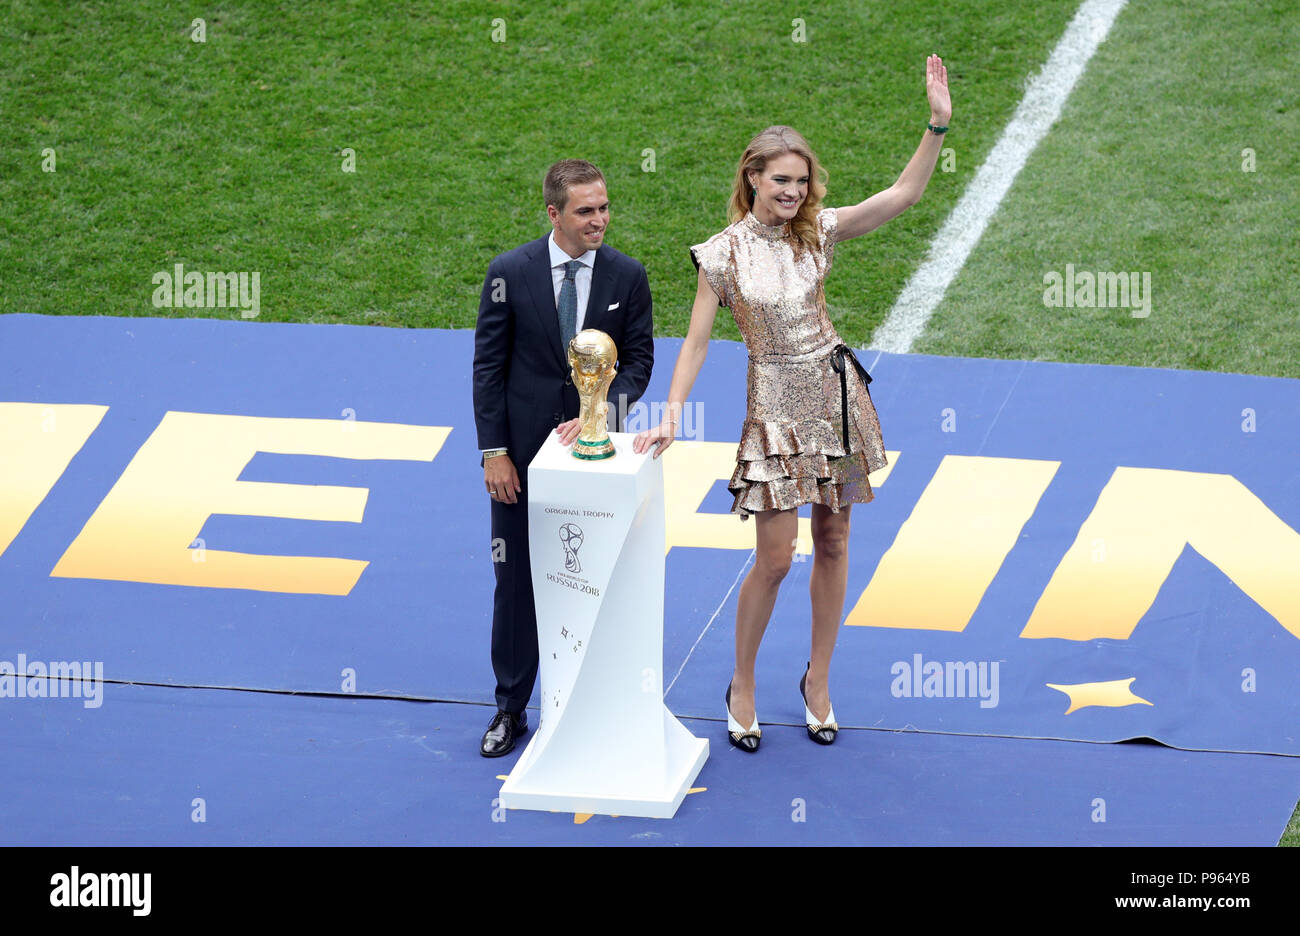 Former Germany captain Philipp Lahm and Natalia Vodianova pose with the world cup trophy prior to the FIFA World Cup Final at the Luzhniki Stadium, Moscow. Stock Photo